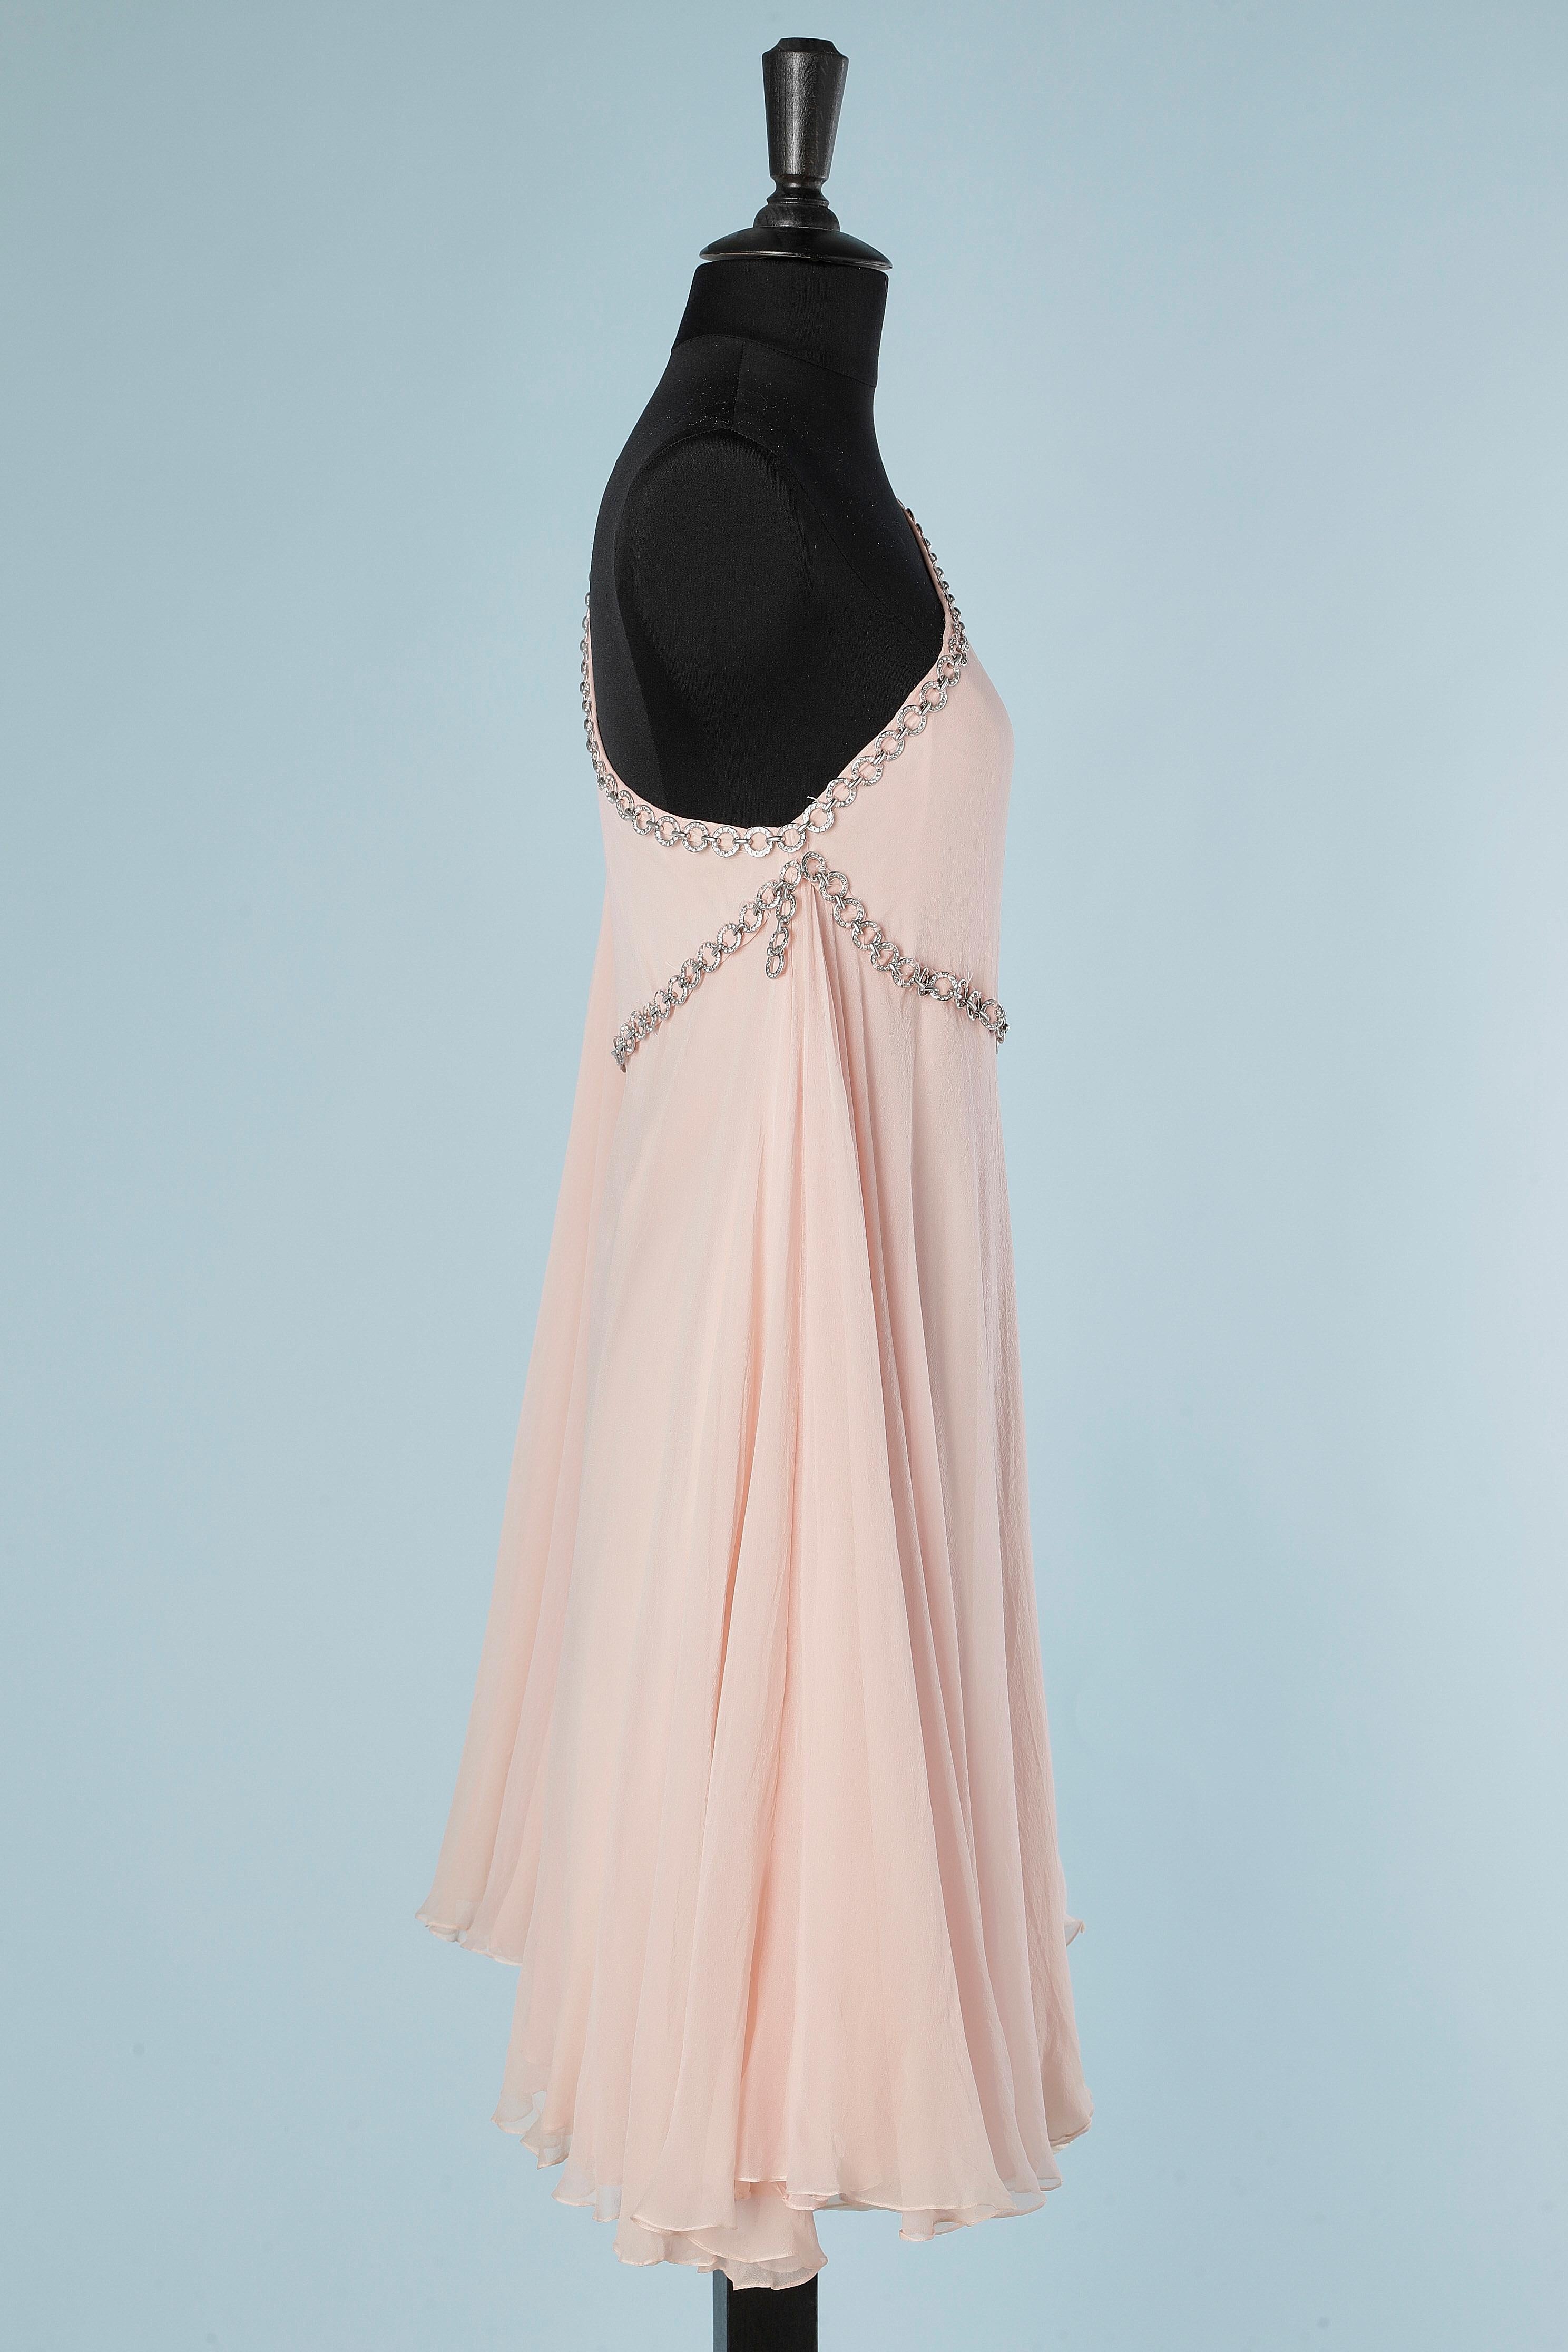 Pale pink babydoll cocktail dress in silk chiffon and chain  Stavropoulos  In Excellent Condition For Sale In Saint-Ouen-Sur-Seine, FR